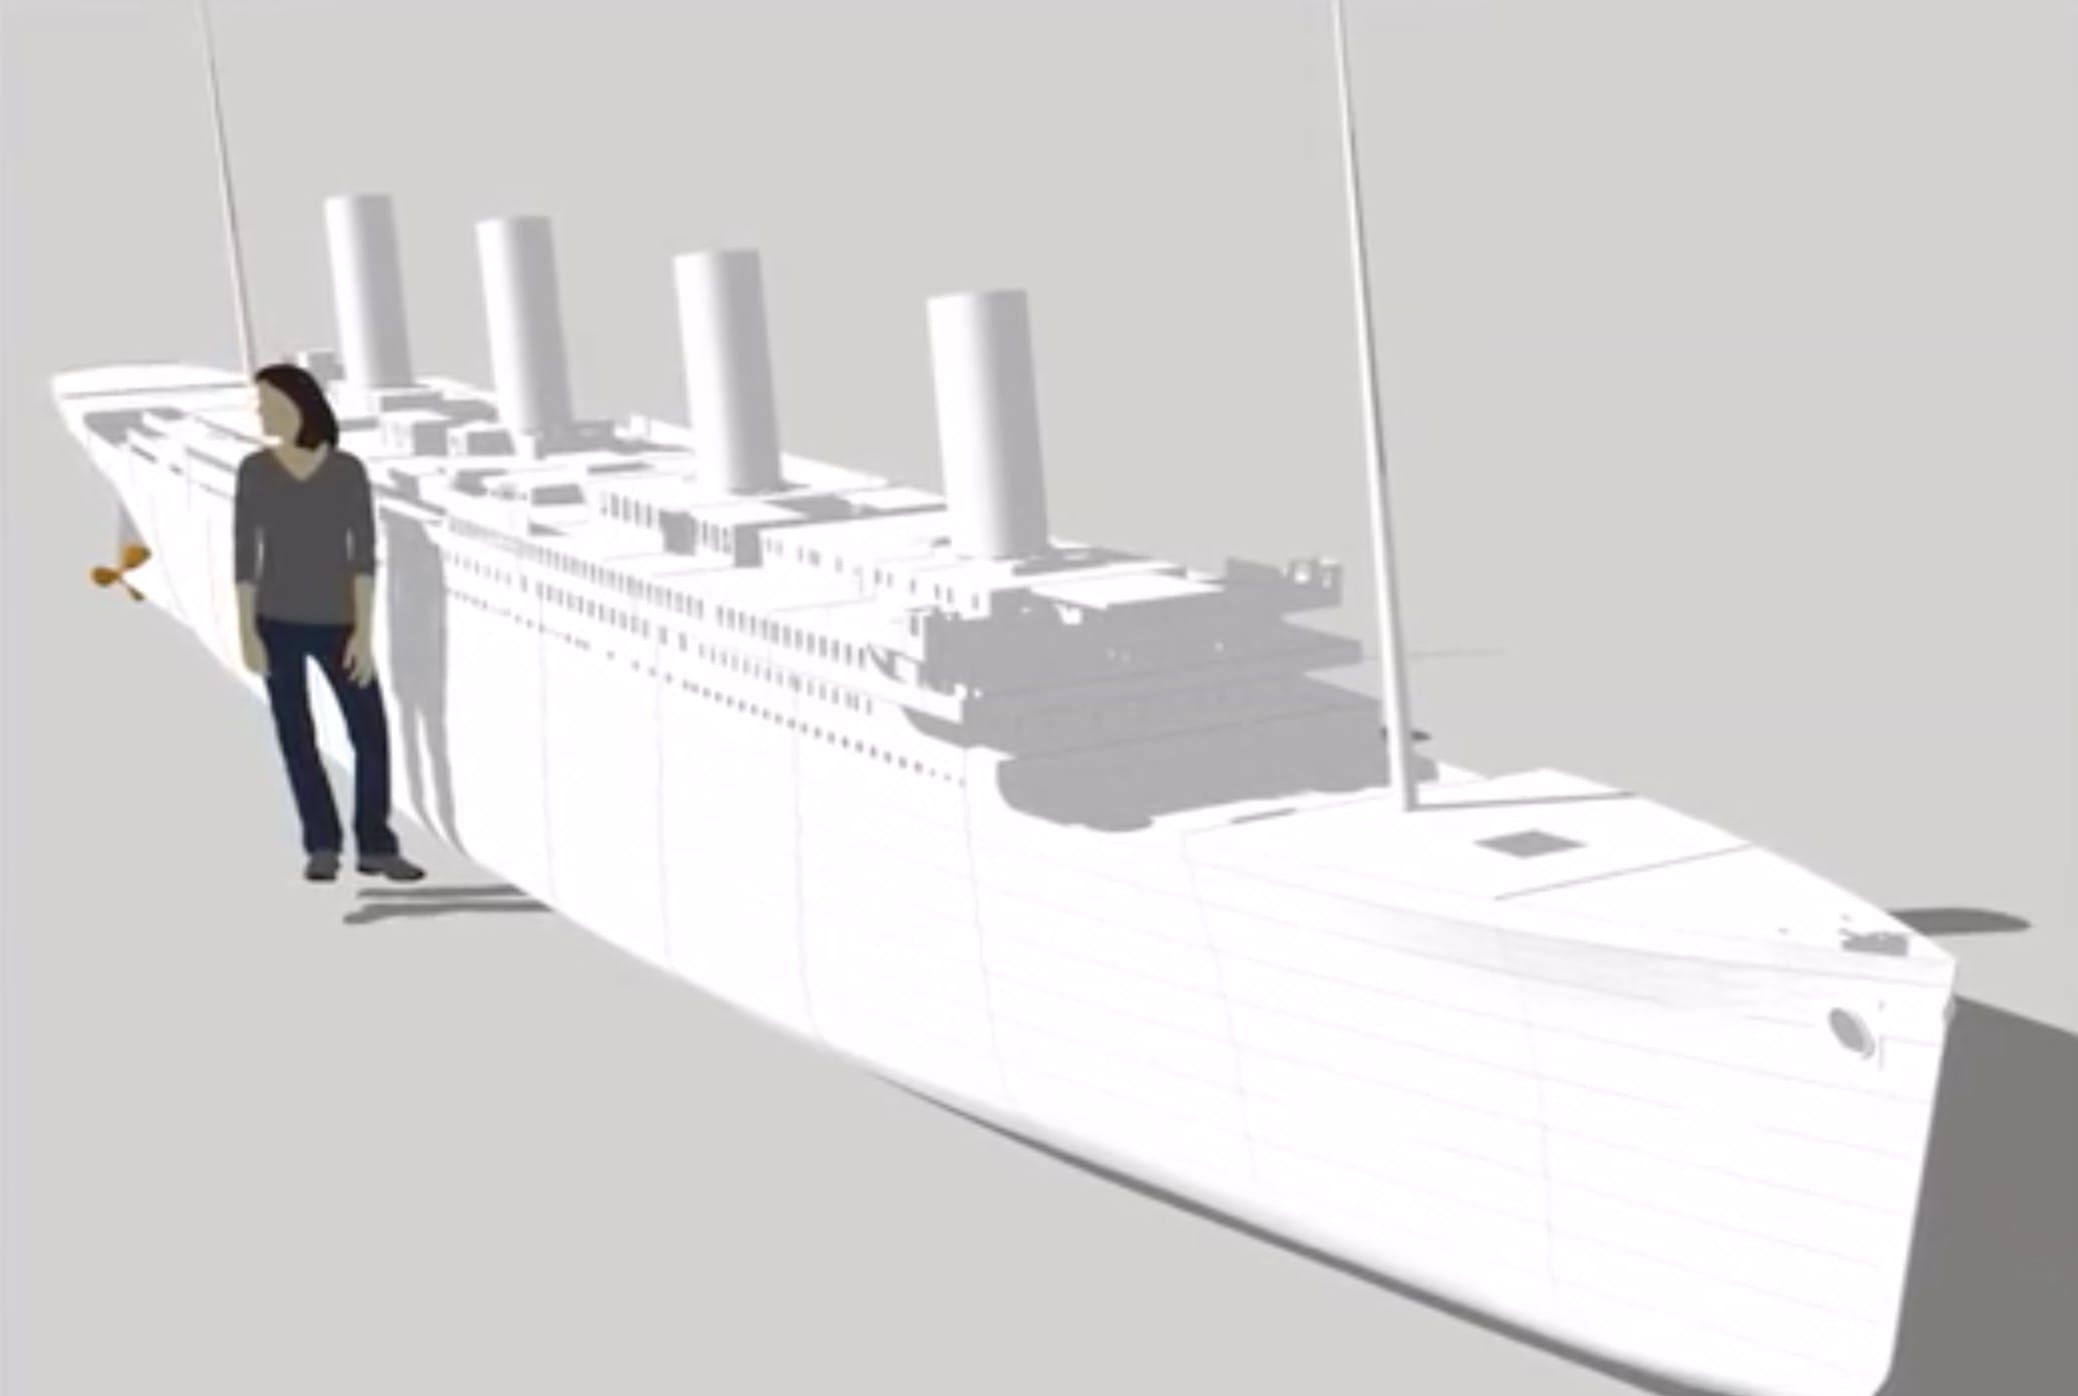  The size of the much larger Titanic replica 